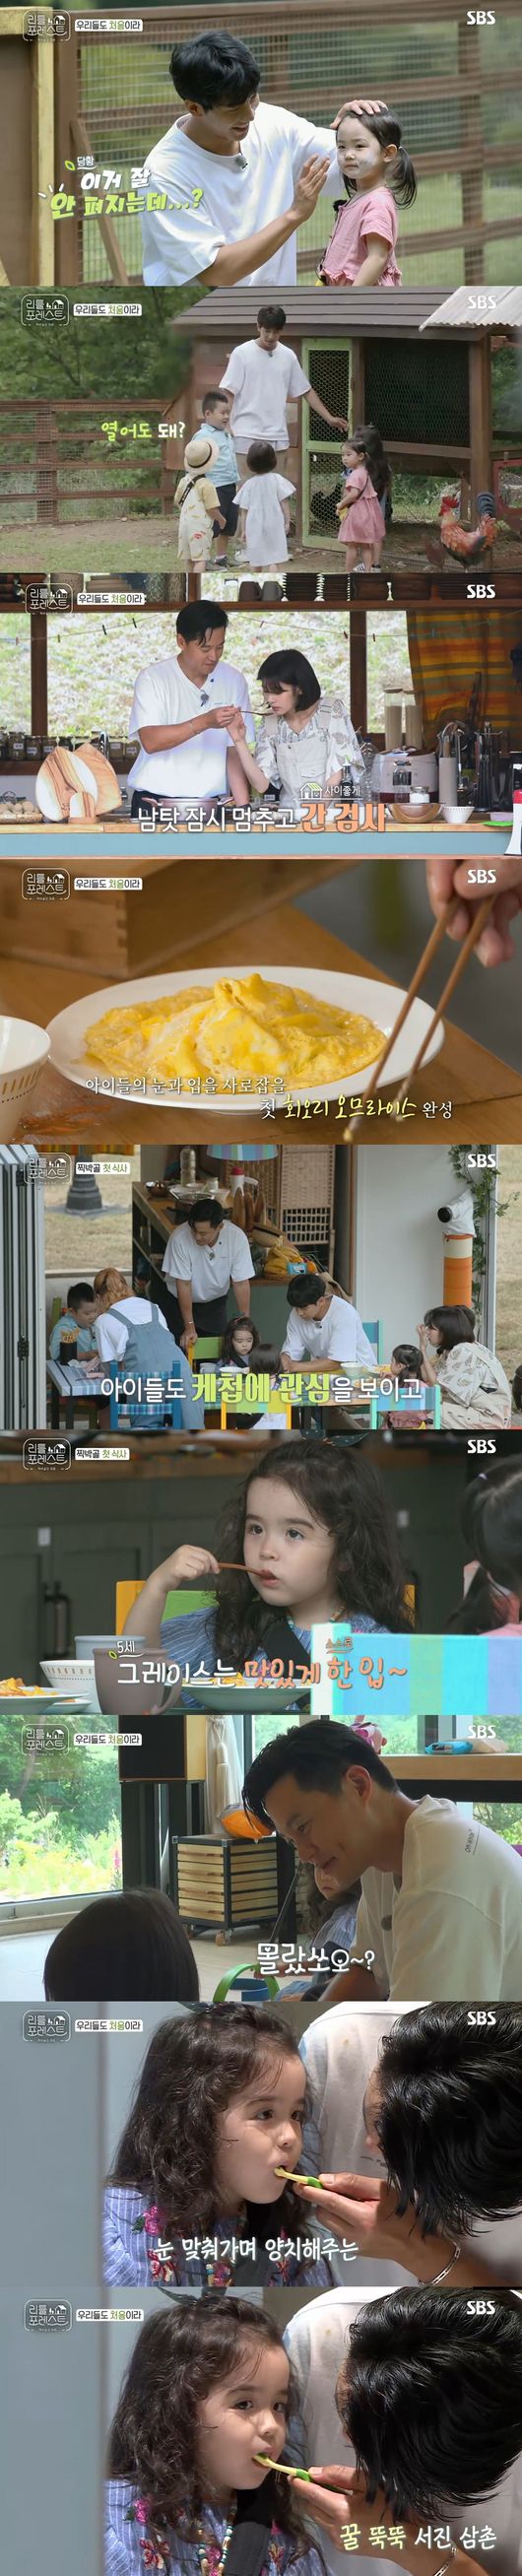 The affection of Little Forest Lee Seo-jin exploded.SBS Little Forest, which aired on the 13th, ranked first overall in drama, entertainment and cultural programs broadcast on Tuesday, with 2.8% of the 2049 Target ratings (based on Nielsen Korea/2 parts), which is an important indicator of major advertising officials.The average audience rating of households in the Seoul metropolitan area was 6.1%, the highest audience rating per minute soared to 7.7%.On this day, the first meeting of five children and four members of Lee Seo-jin, Lee Seung-gi, Park Na-rae and Jung So-min was revealed.Earlier, all five children who had raised expectations by entering the Ttakbangol, a caring house of Little Forest, appeared in the first broadcast.First Lee Seung-gi and Park Na-rae led the children to an animal farm in the twig.At the animal farm, where rabbits, chickens, and chicks are located, children, with the help of The Uncle, took out the eggs that the chicken had produced and fed them directly to the rabbits and became friends with the animals.But Park Na-rae, who has chicken phobias, was seen as stuck away from the animal farm without even entering it.Lee Seung-gis true poisonous child care has begun.Park Na-rae laughed as he stood outside the fence and cheered, watching Lee Seung-gi struggling with children alone in an animal farm.Lee Seo-jin and Jung So-min were busy preparing their first meal for children.The lunch menu of the day was Hwiry Omrais, a menu that Lee Seo-jin learned in advance.Lee Seo-jin looked meticulous, not forgetting what mothers had asked for, but chopping and chopping up ingredients for children.In addition, he showed his aspect as a make-up main chef with a child cooking certificate by making egg whirls skillfully.After lunch preparation, the first meal with the children was a difficult mission for the novice carers.The members sweated to feed the children who were not accustomed to eating alone during lunch.Even after feeding the children, they could not eat properly because they were taking care of the children.The reality was quite different from the ideals they had dreamed of, and the members began to speak less and less, but there was a ray of light in the midst of warlike parenting: the childrens catastrophic cuteness.The members of The Uncle, the children who are looking for their aunts, did not lose their laughter even though they were tired.Lee Seo-jins sweetness toward children attracted attention on this day.Lee Seo-jin took off his feet in a cute chorus of Chikachika of the children who finished their meals and became a The delicate brush of her teeth at eye level in Brooke gave viewers a heartfelt look.The scene, in which Lee Seo-jins affection exploded, recorded the highest audience rating of 7.7% per minute, accounting for the best one minute.SBS Little Forest broadcast capture